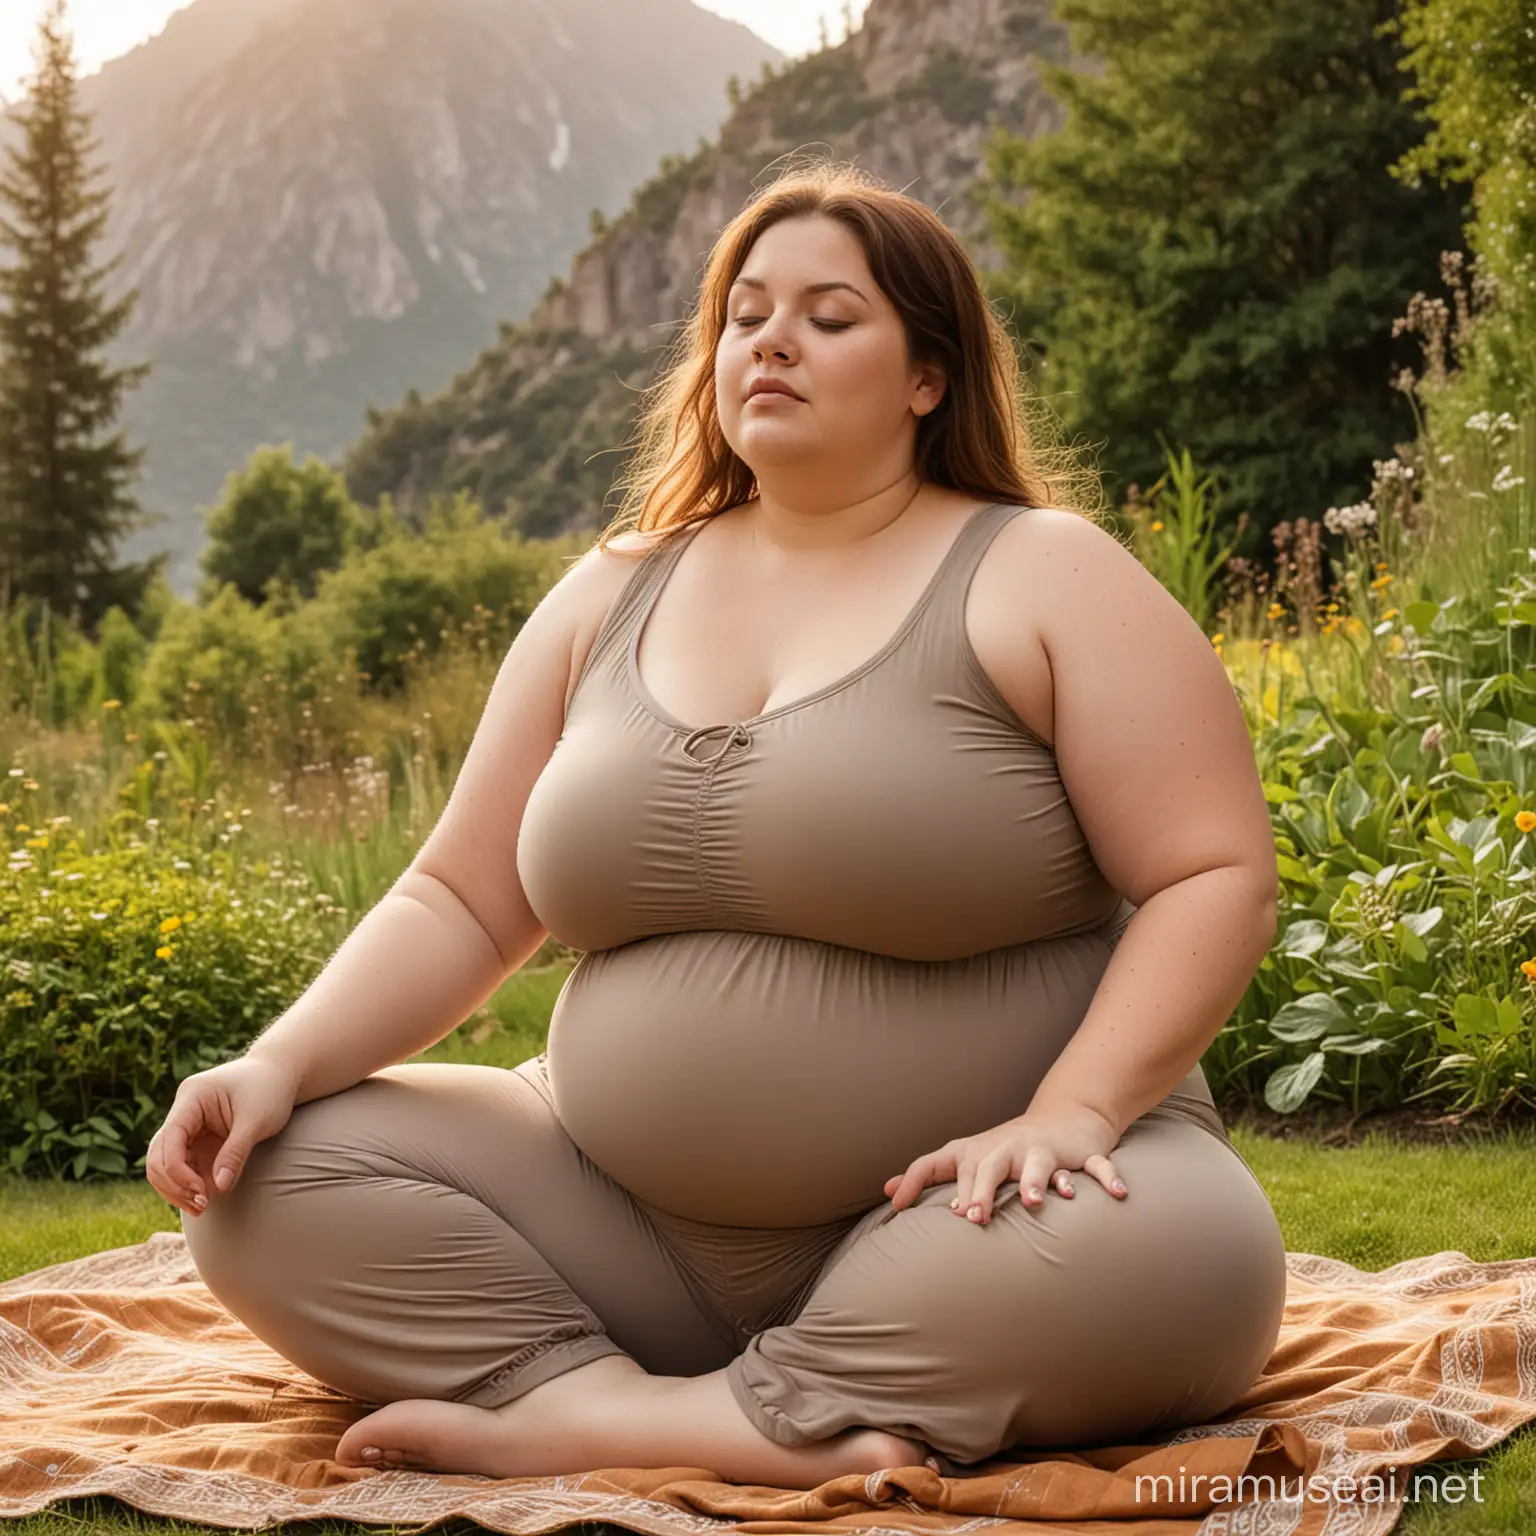 A beautiful overweight fat curvy woman sitting in the garden meditating in the morning with a mountain view background, wearing earth tones, her eyes closed. 